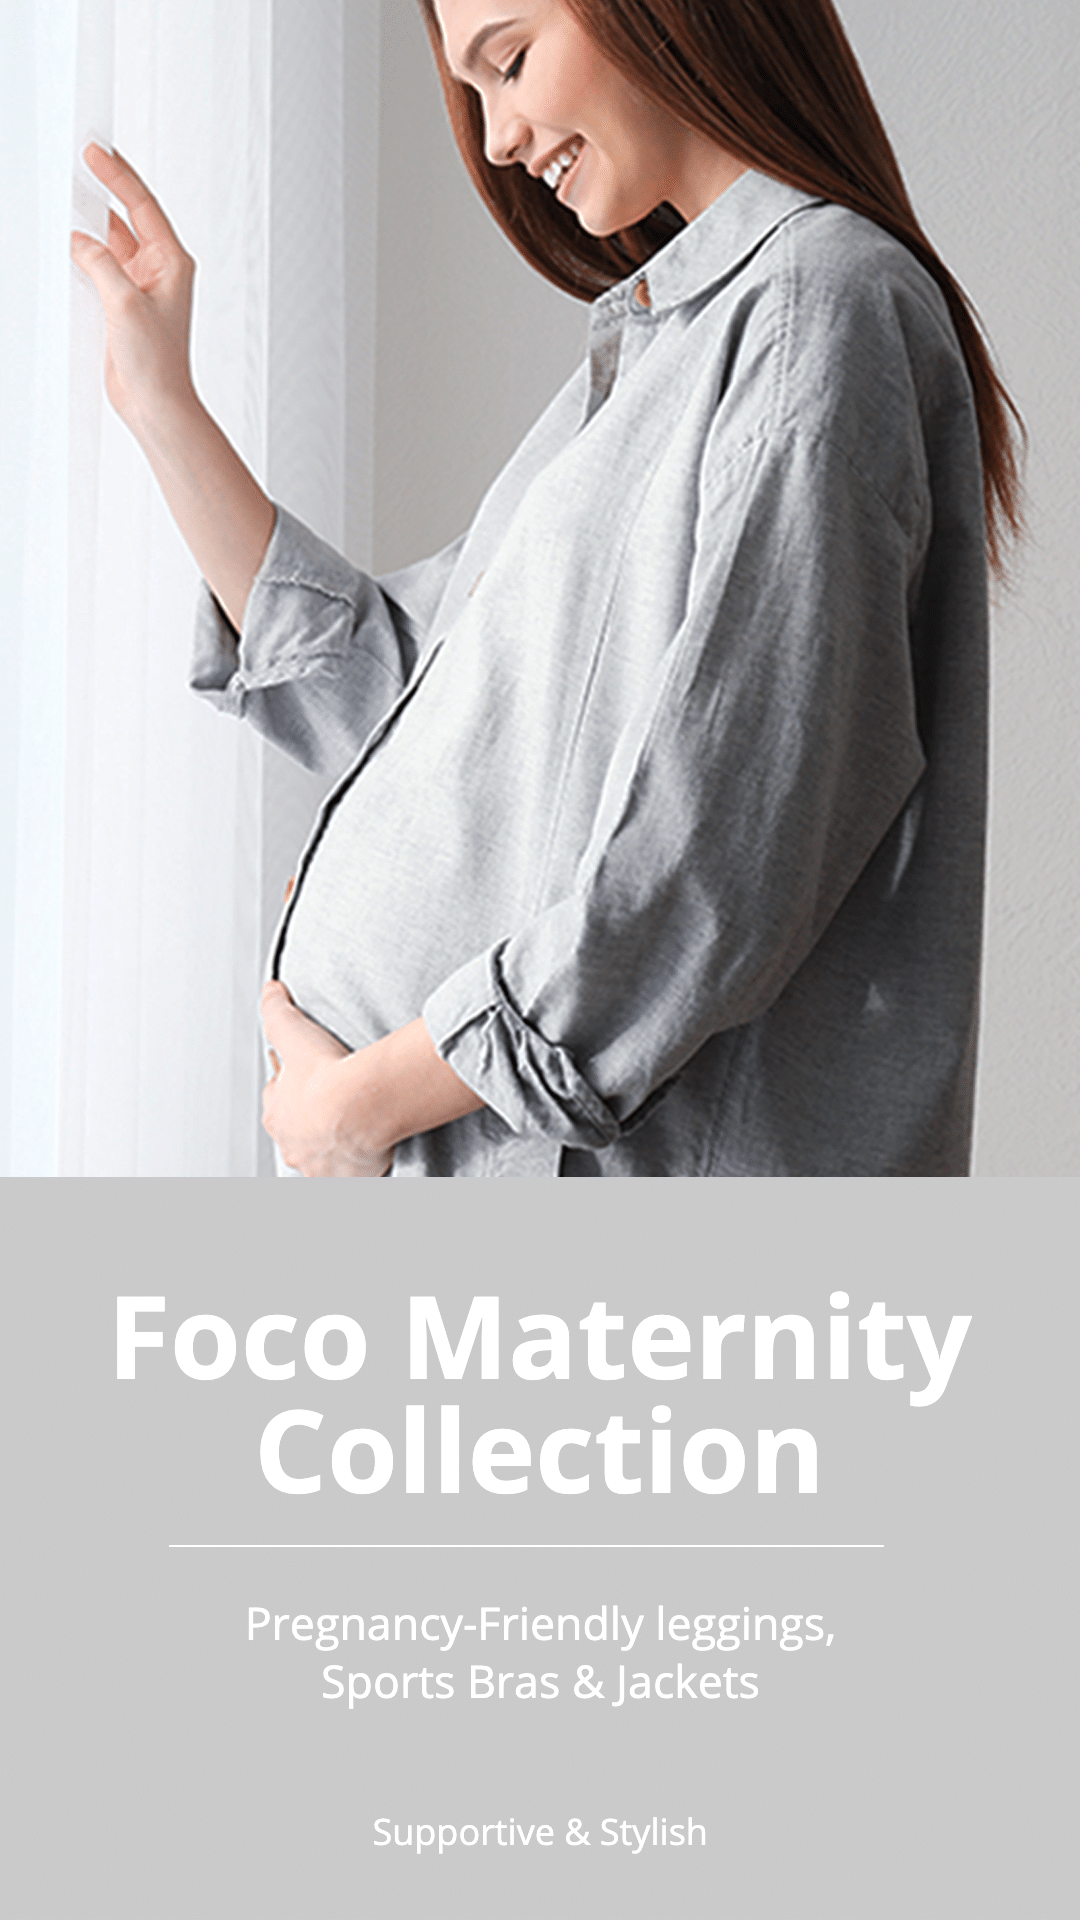 Simple Maternity Collection Promotion Ecommerce Story